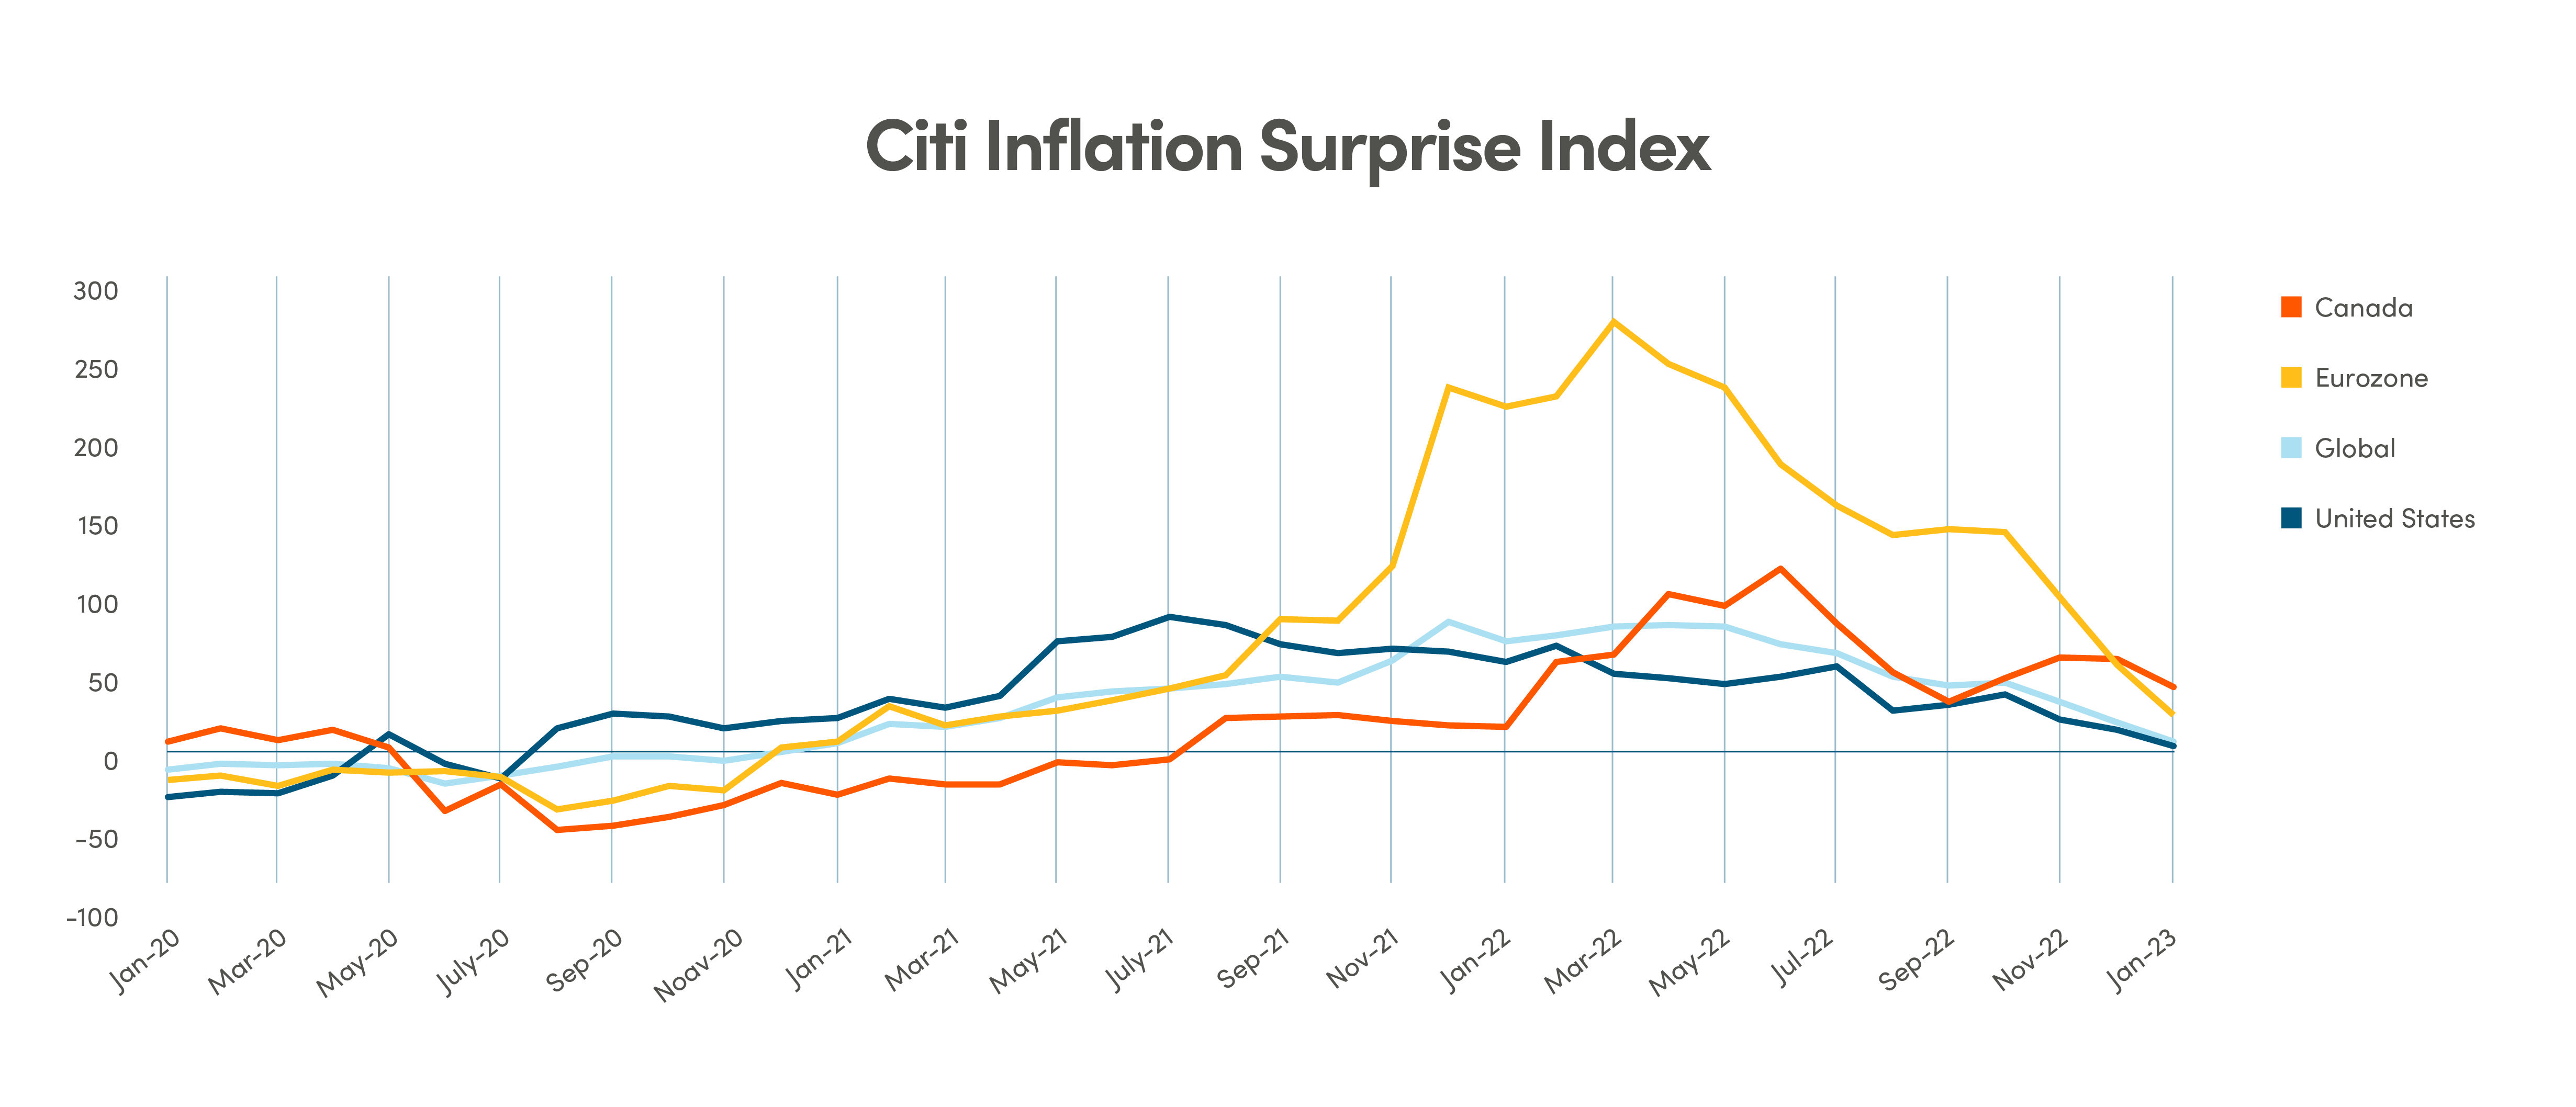 Line graph showing the Citi Inflation Surprise Index, monthly from January 2020 to January 2023 by region